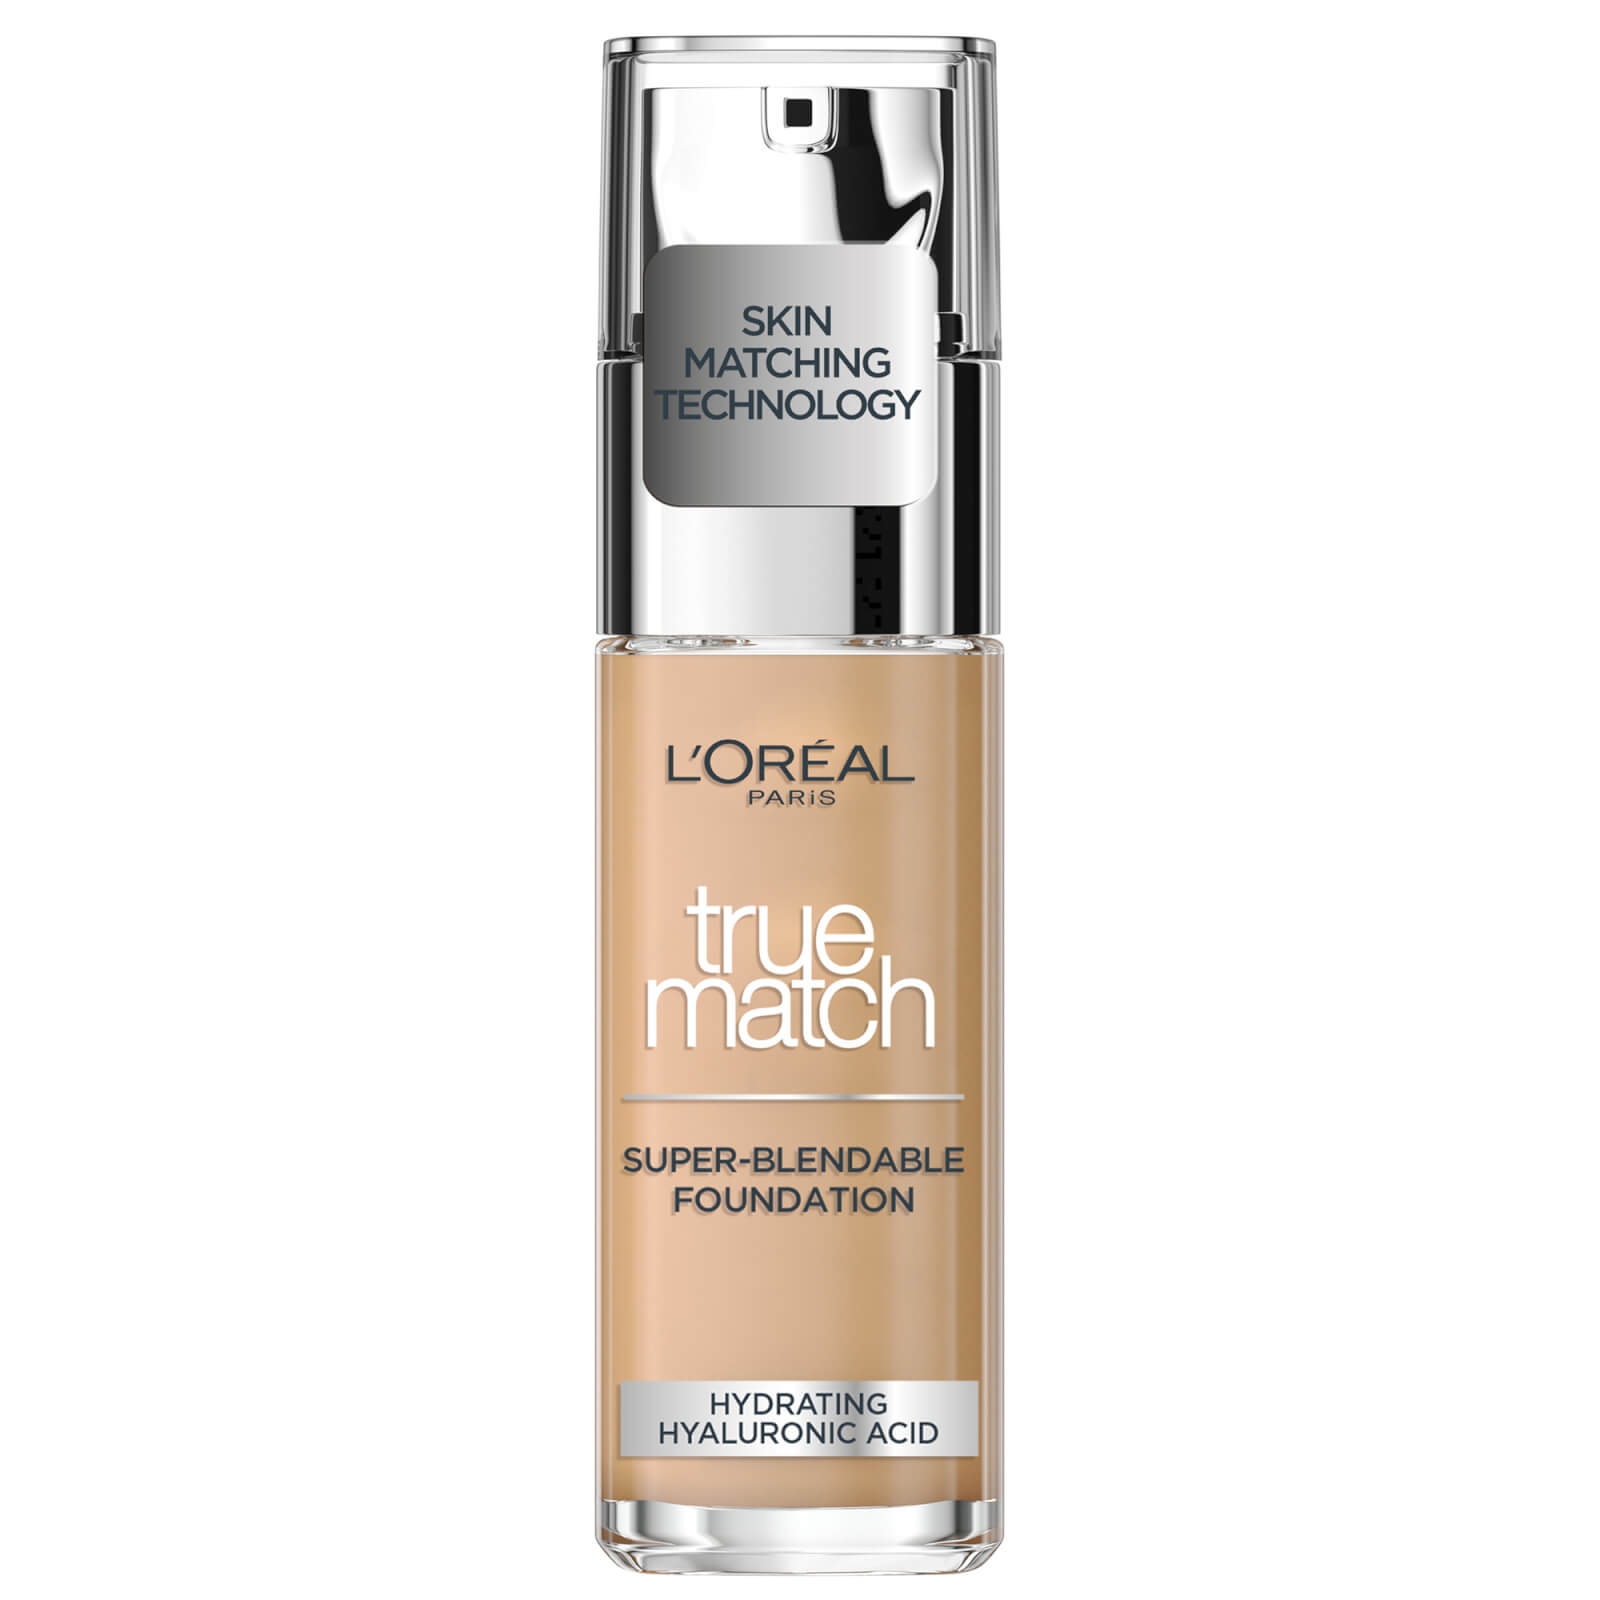 L'Oreal Paris True Match Liquid Foundation with SPF and Hyaluronic Acid 30ml (Various Shades) - 3C R